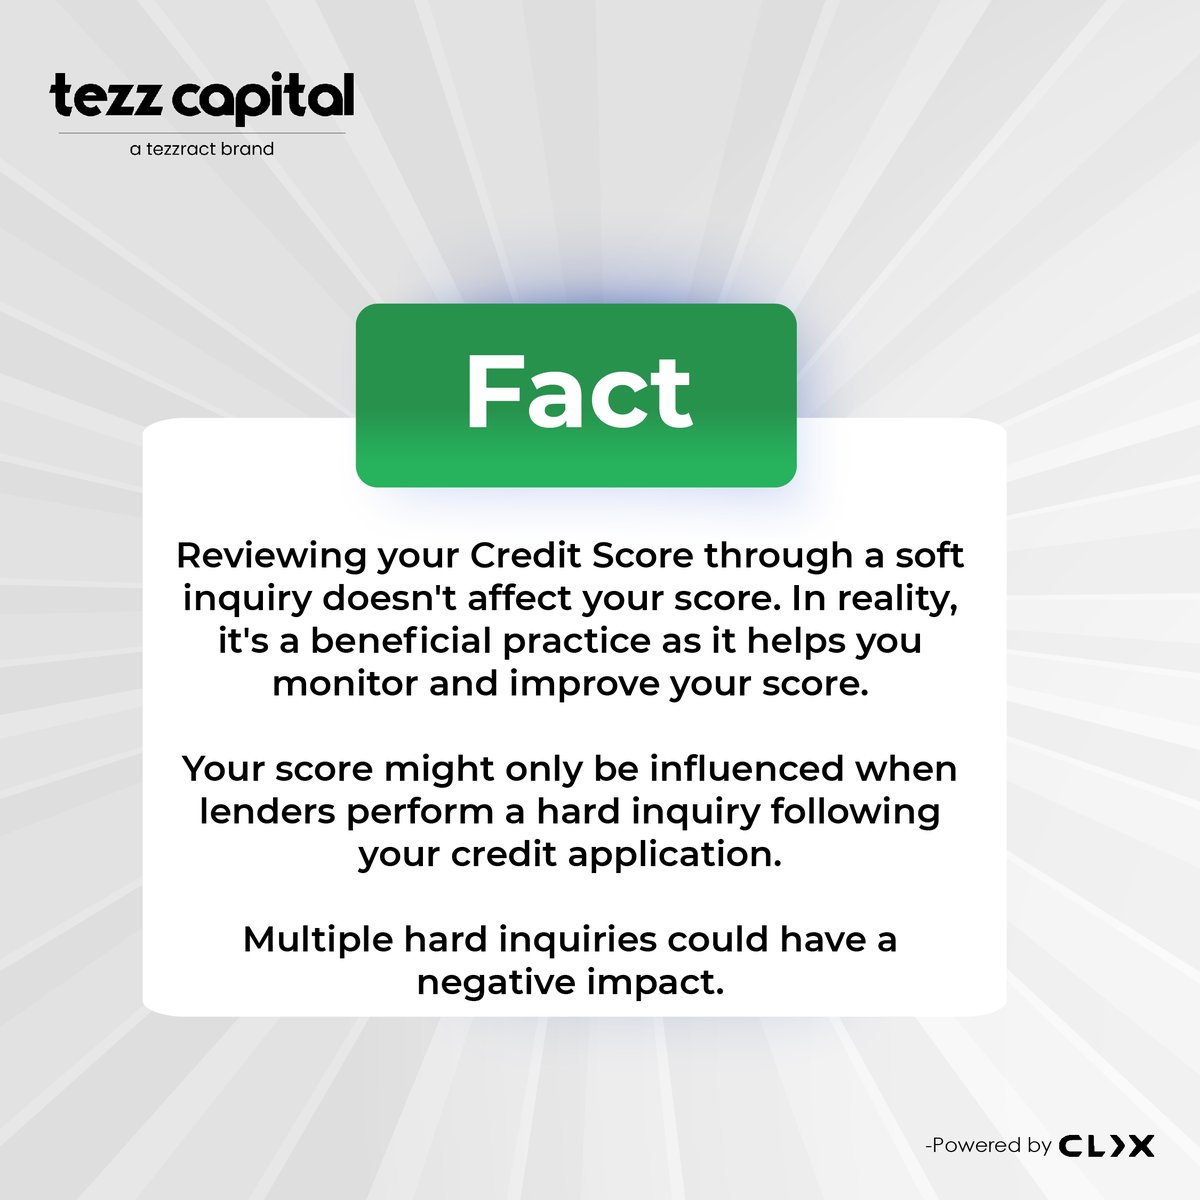 Keeping an eye on your credit score isn't a negative habit; instead, it should be done routinely to assist you in monitoring and enhancing your score.
.
.
.
#TezzCapital #FinancialHealth #CreditMonitoring #SmartFinance #CreditScoreTips #loanservices #BusinessGrowth #ContactUs